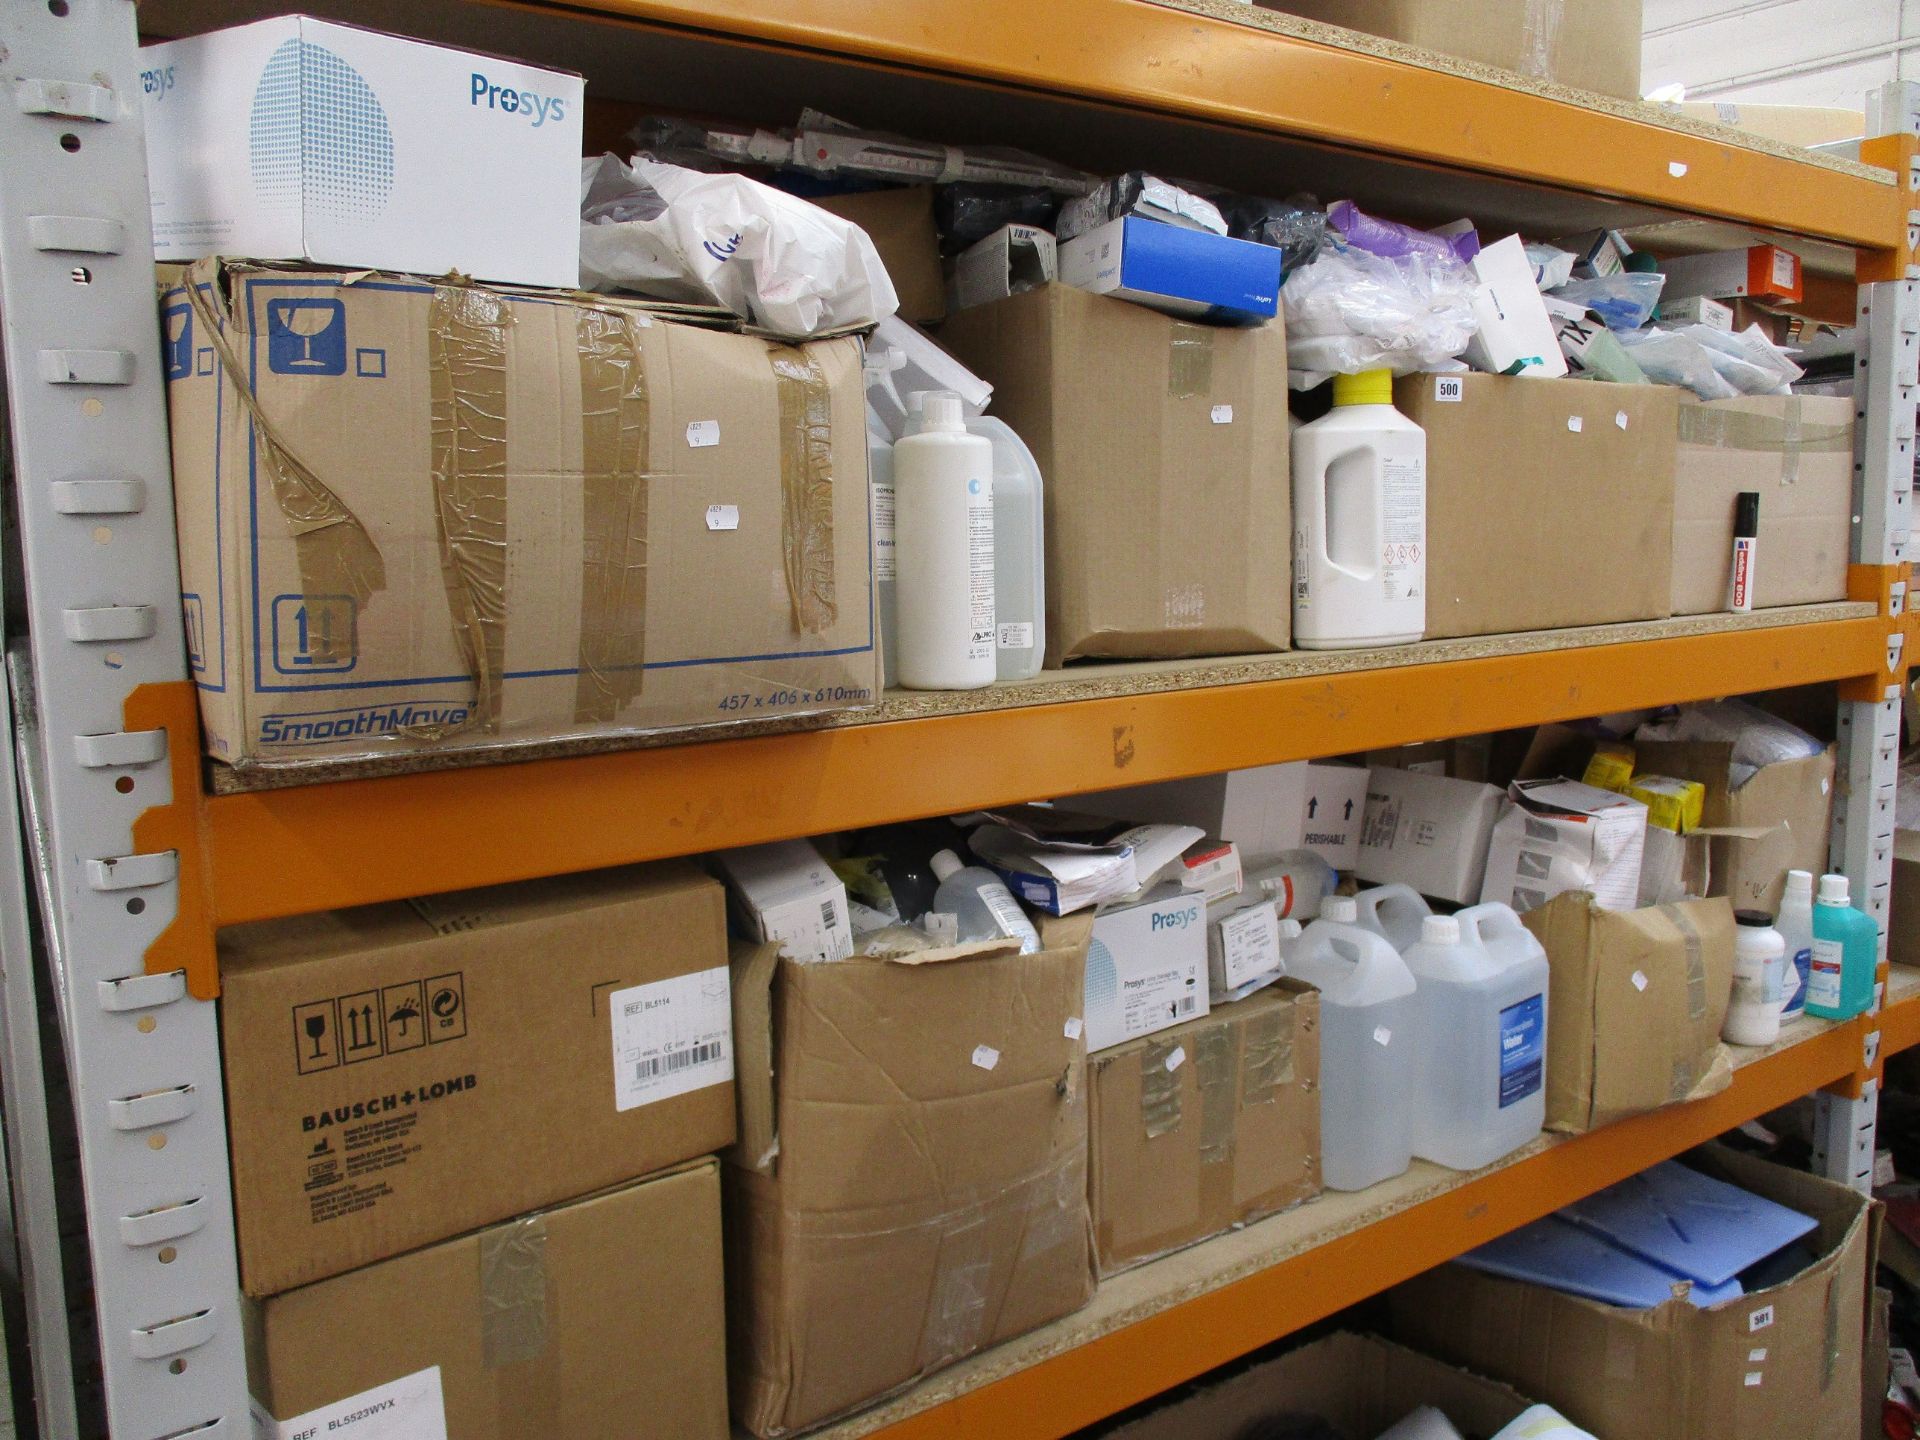 Two shelves of assorted medical and related items to include gloves, hand sanitizer and soap.